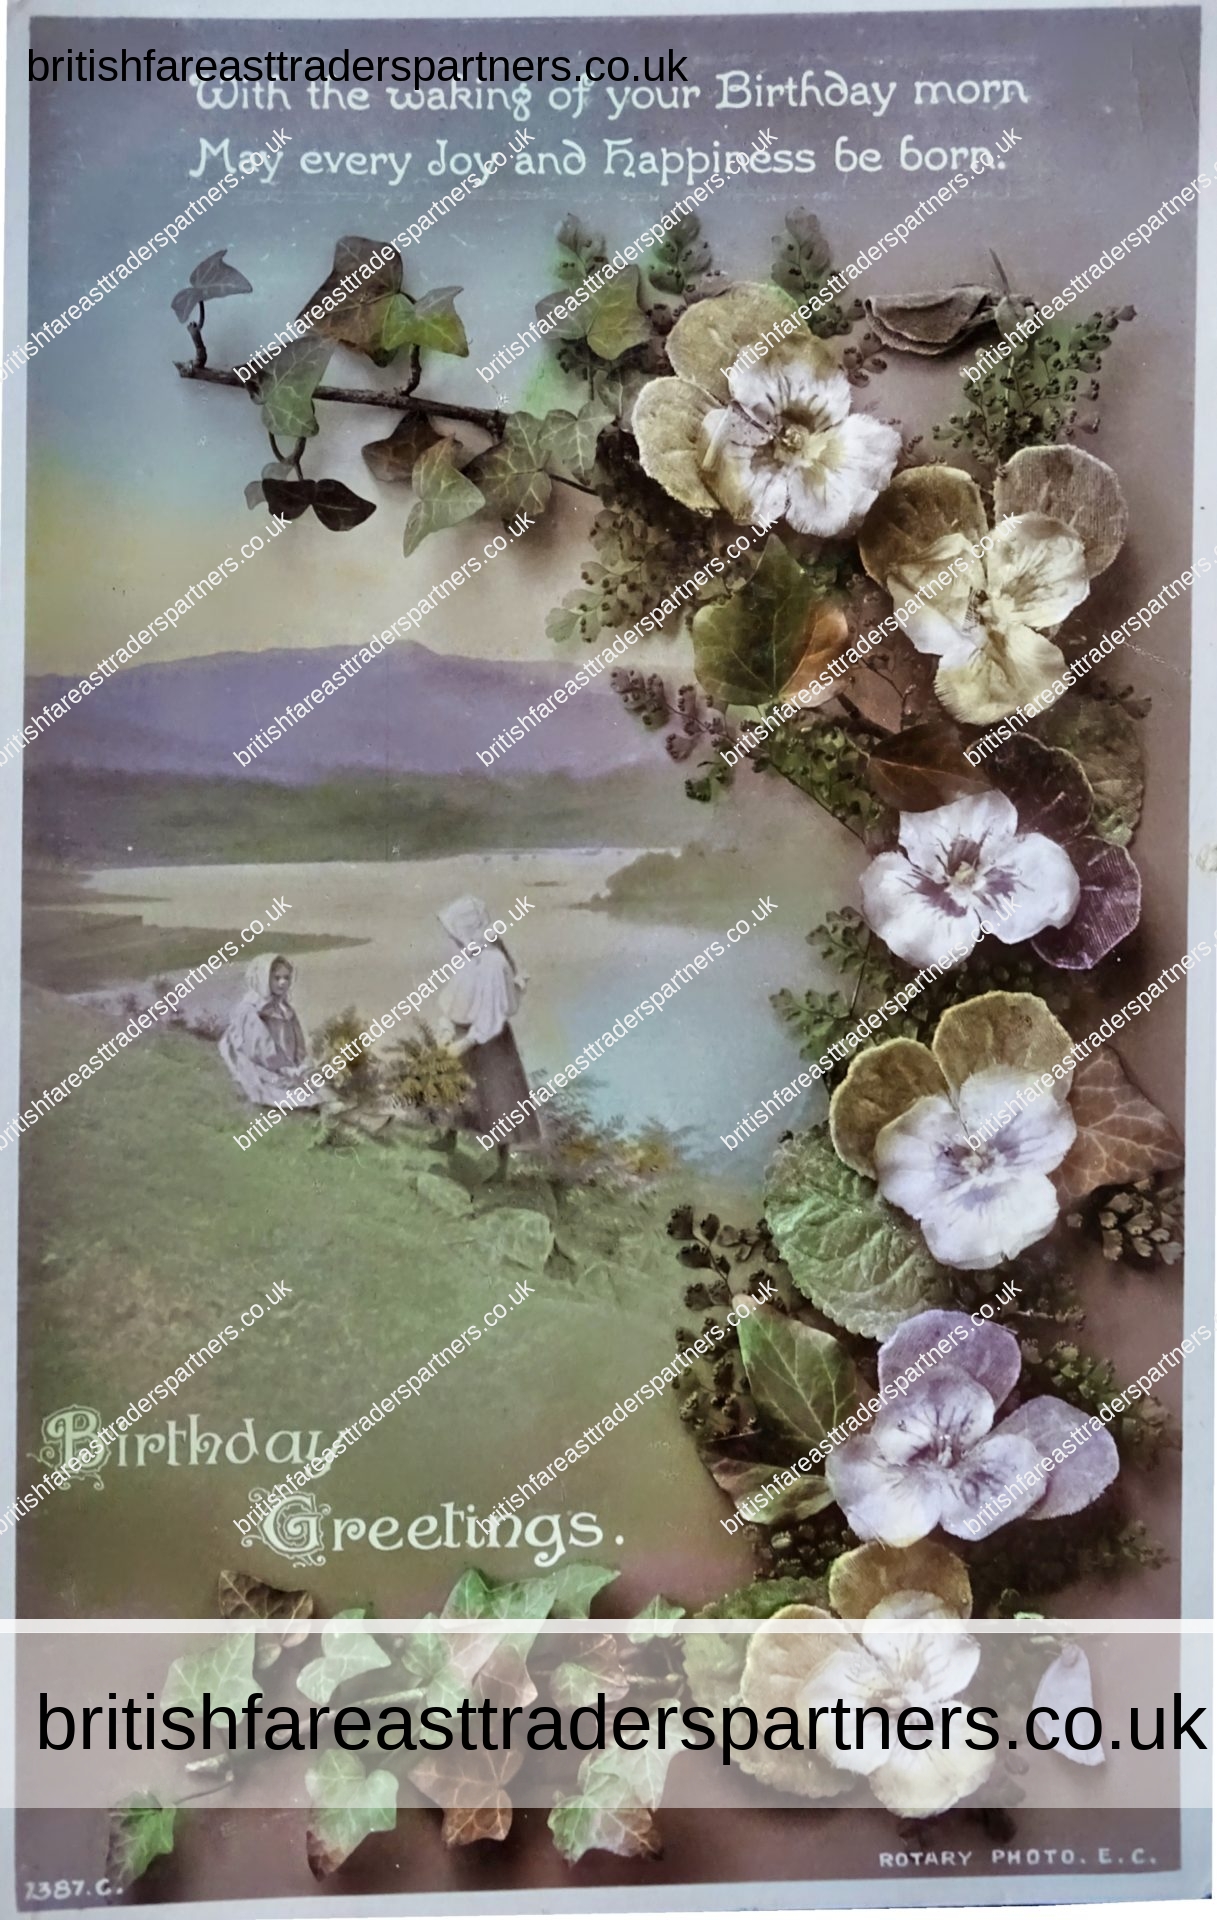 VINTAGE / ANTIQUE BIRTHDAY GREETINGS FLORAL & COUNTRYSIDE SCENE ROTARY PHOTOGRAPHIC SERIES PRINTED IN BRITAIN COLLECTABLES | POSTCARDS | GREETINGS